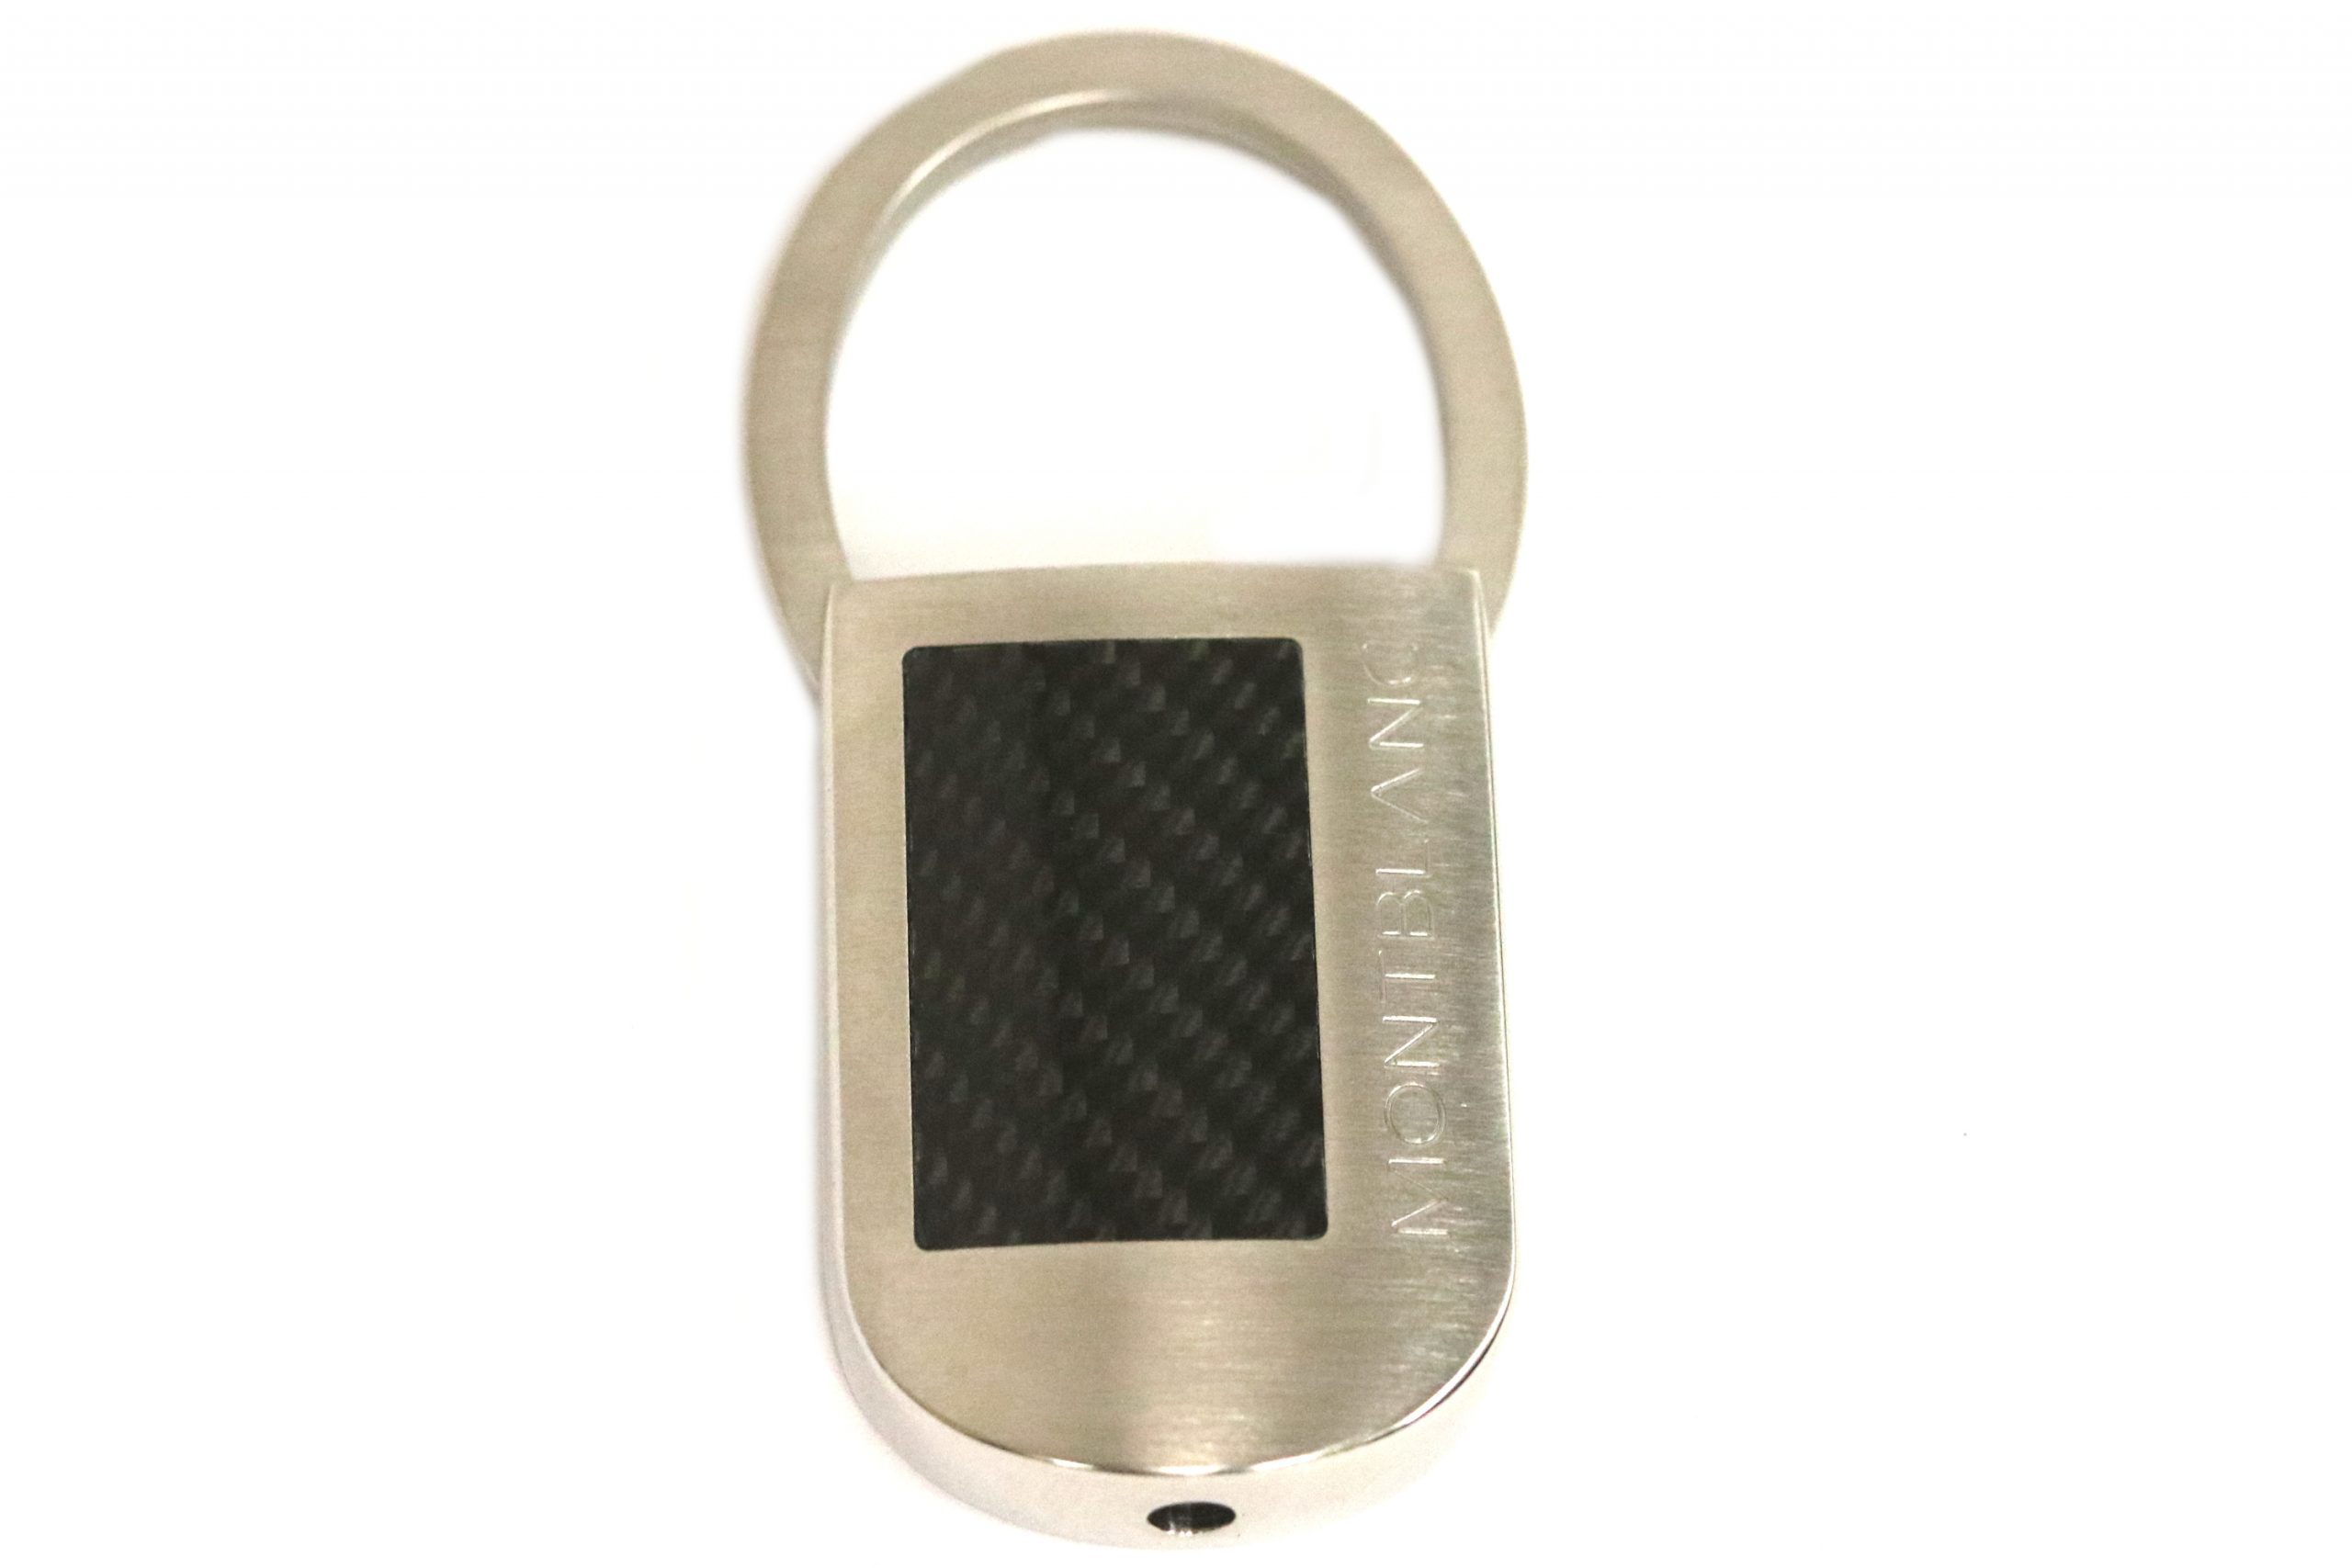 Montblanc Stainless Steel Key Ring - Pearson's Jewelry